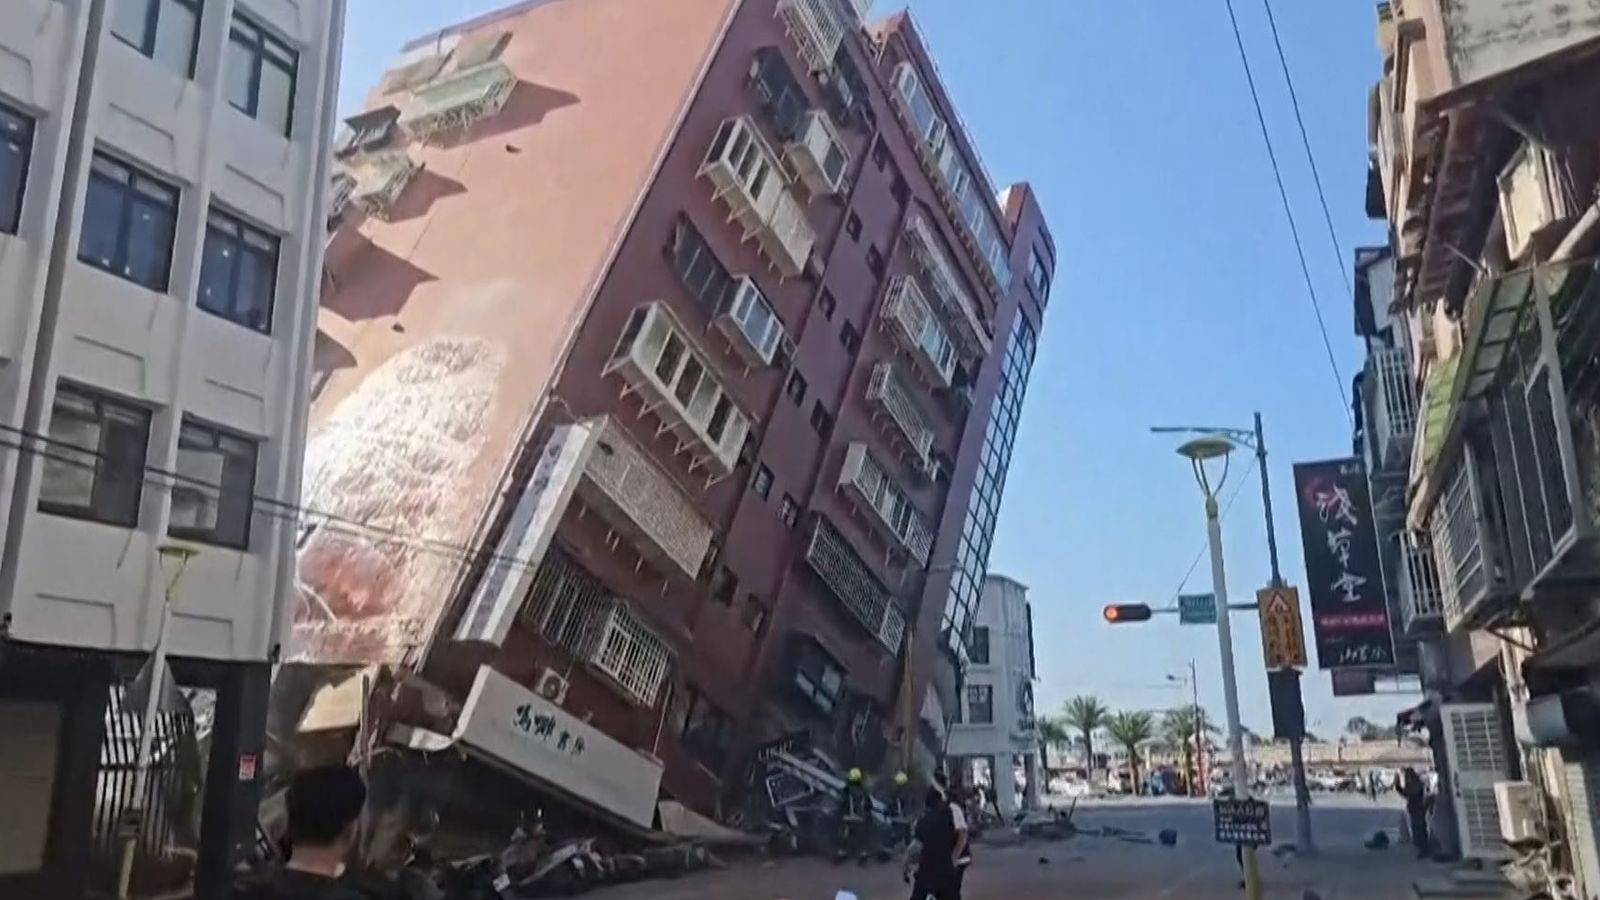 Taiwan: Videos capture moment earthquake struck - with huge landslide and shaking bridge